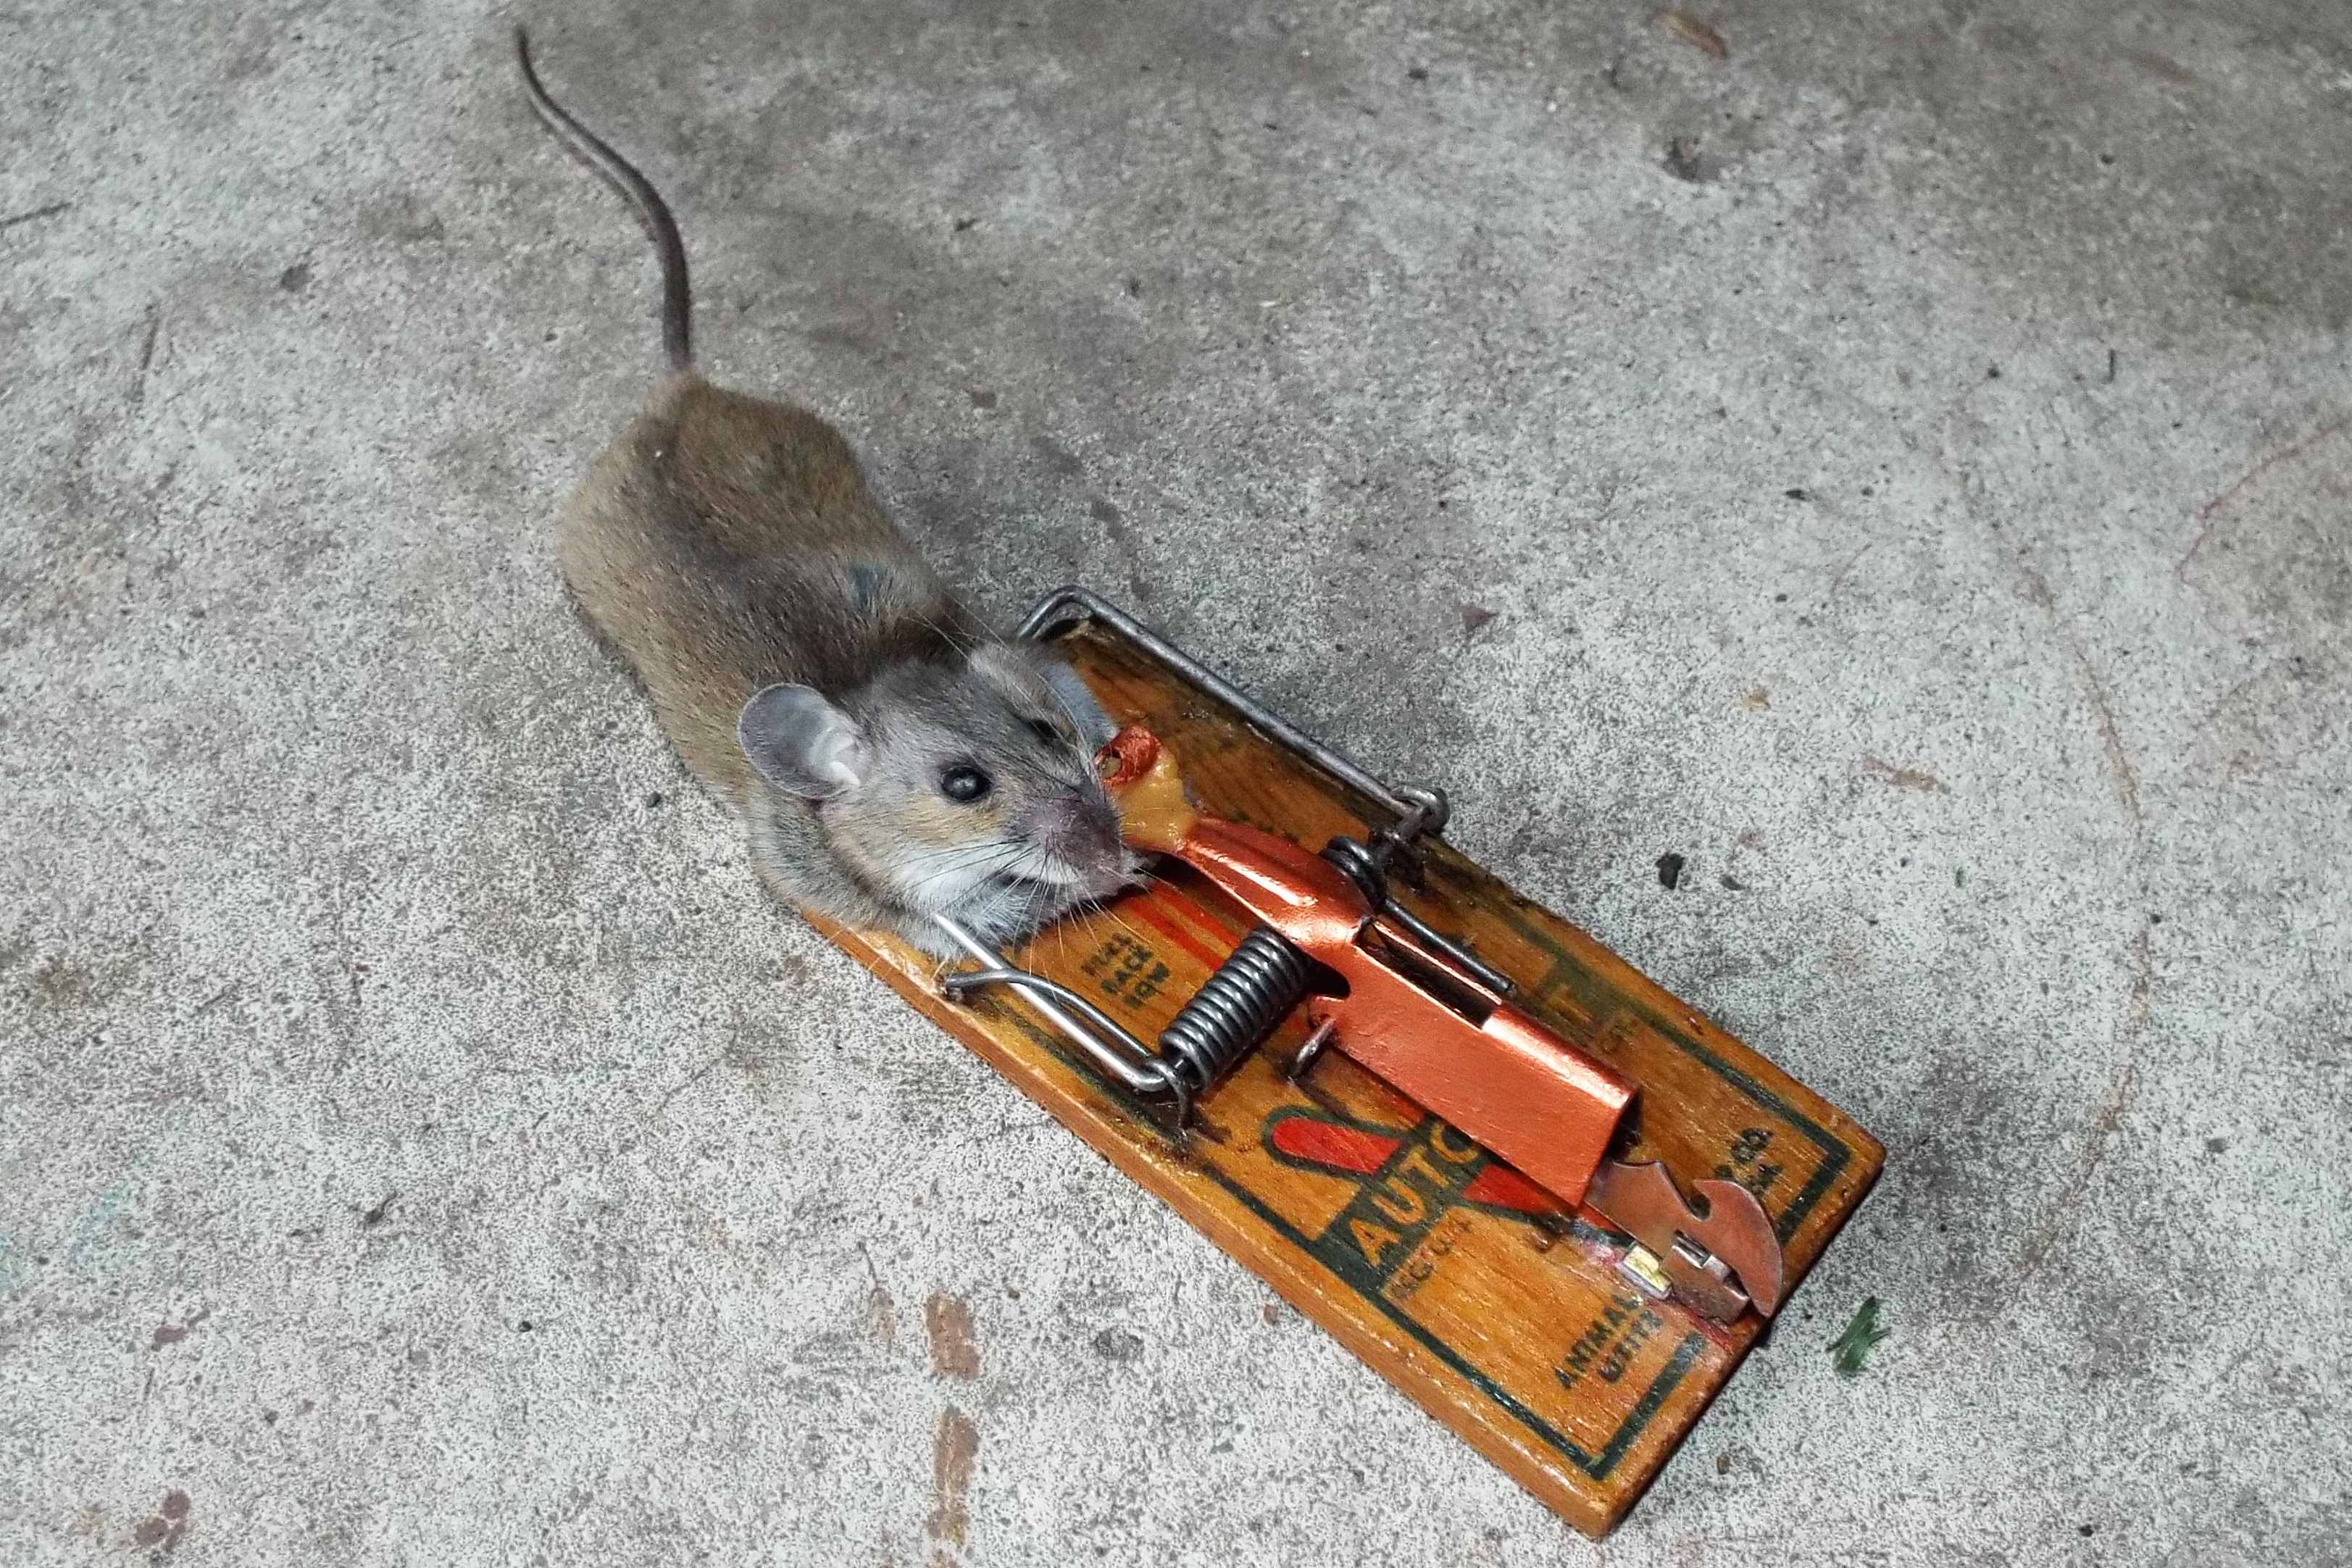 https://upload.wikimedia.org/wikipedia/commons/d/de/Vintage_Victor_mousetrap_with_dead_mouse.jpg